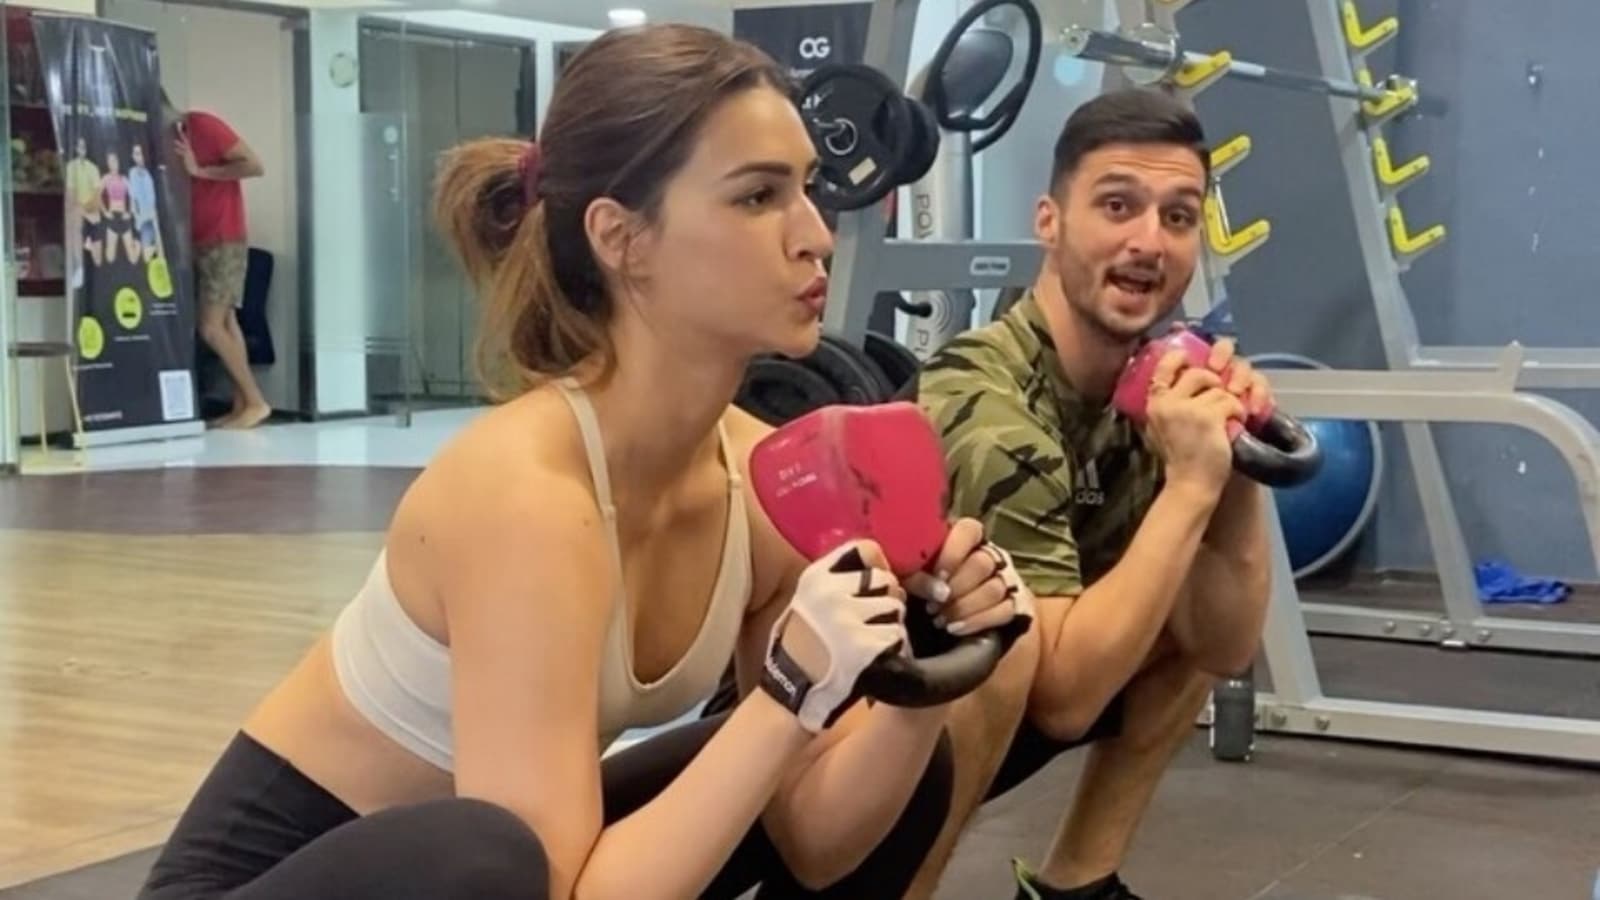 Kriti Sanon pushes her limits with kettlebell squats during intense gym session, here’s why you should try it: Watch